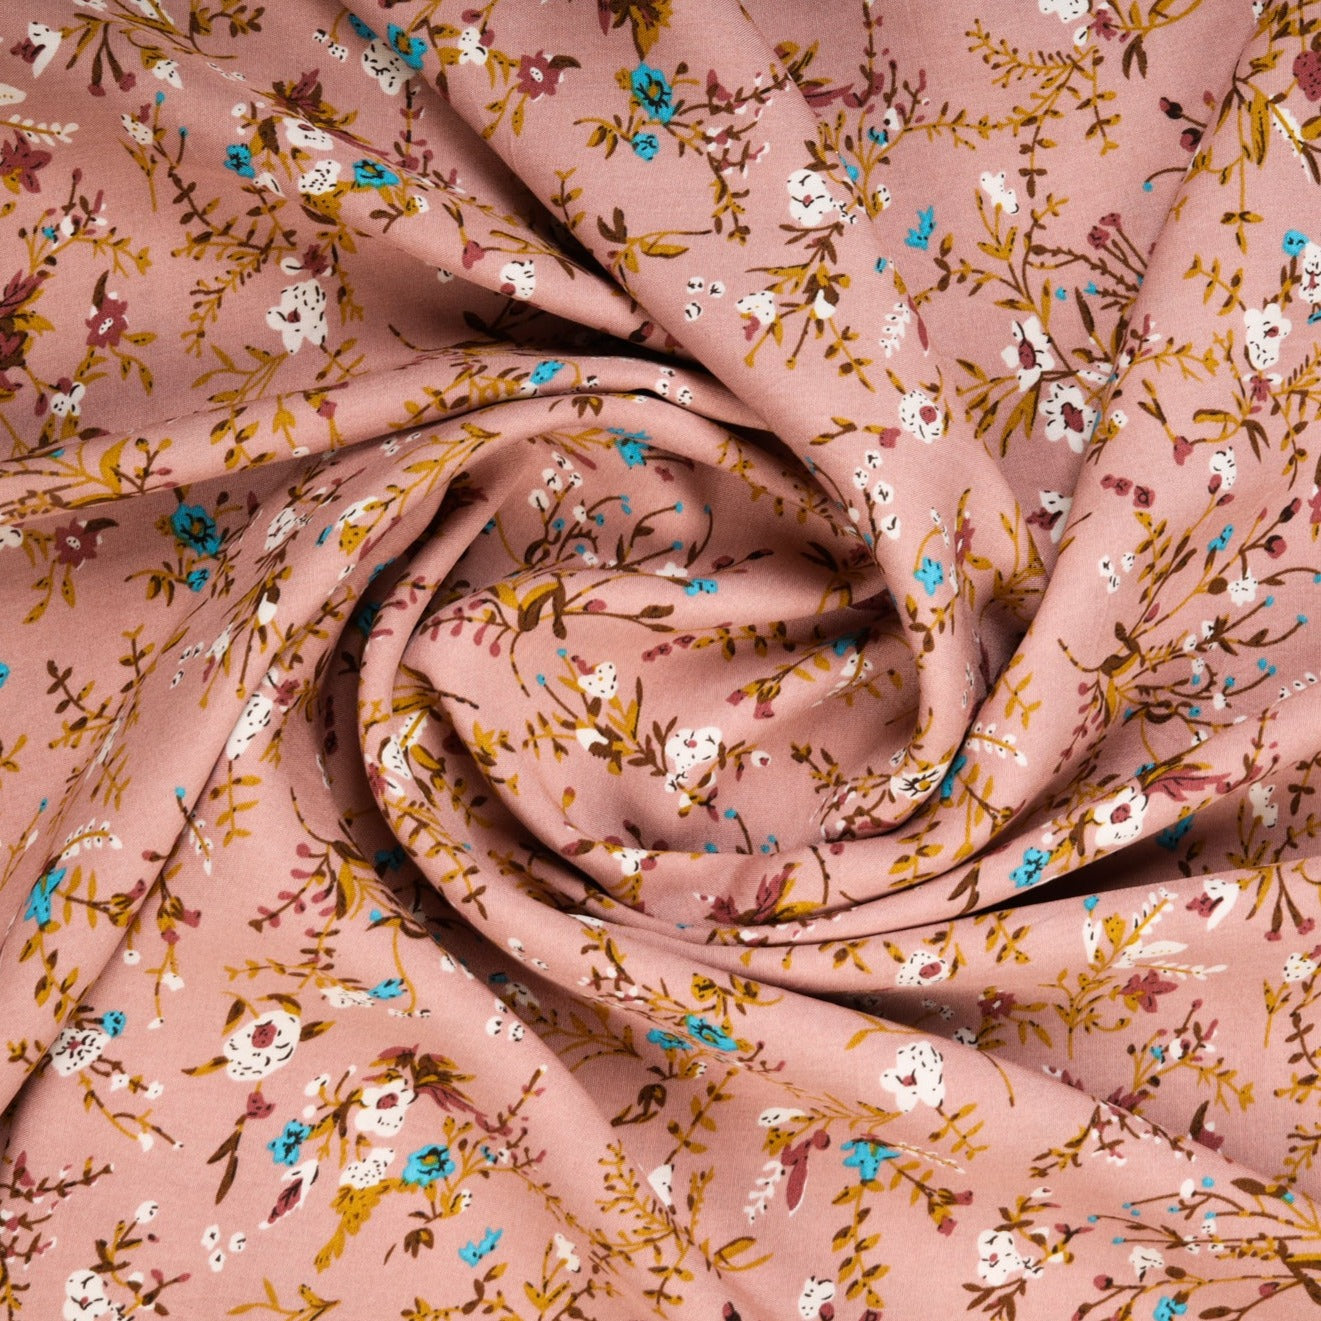 Peach Pink Ditsy Floral Print Rayon Fabric Trade UNO